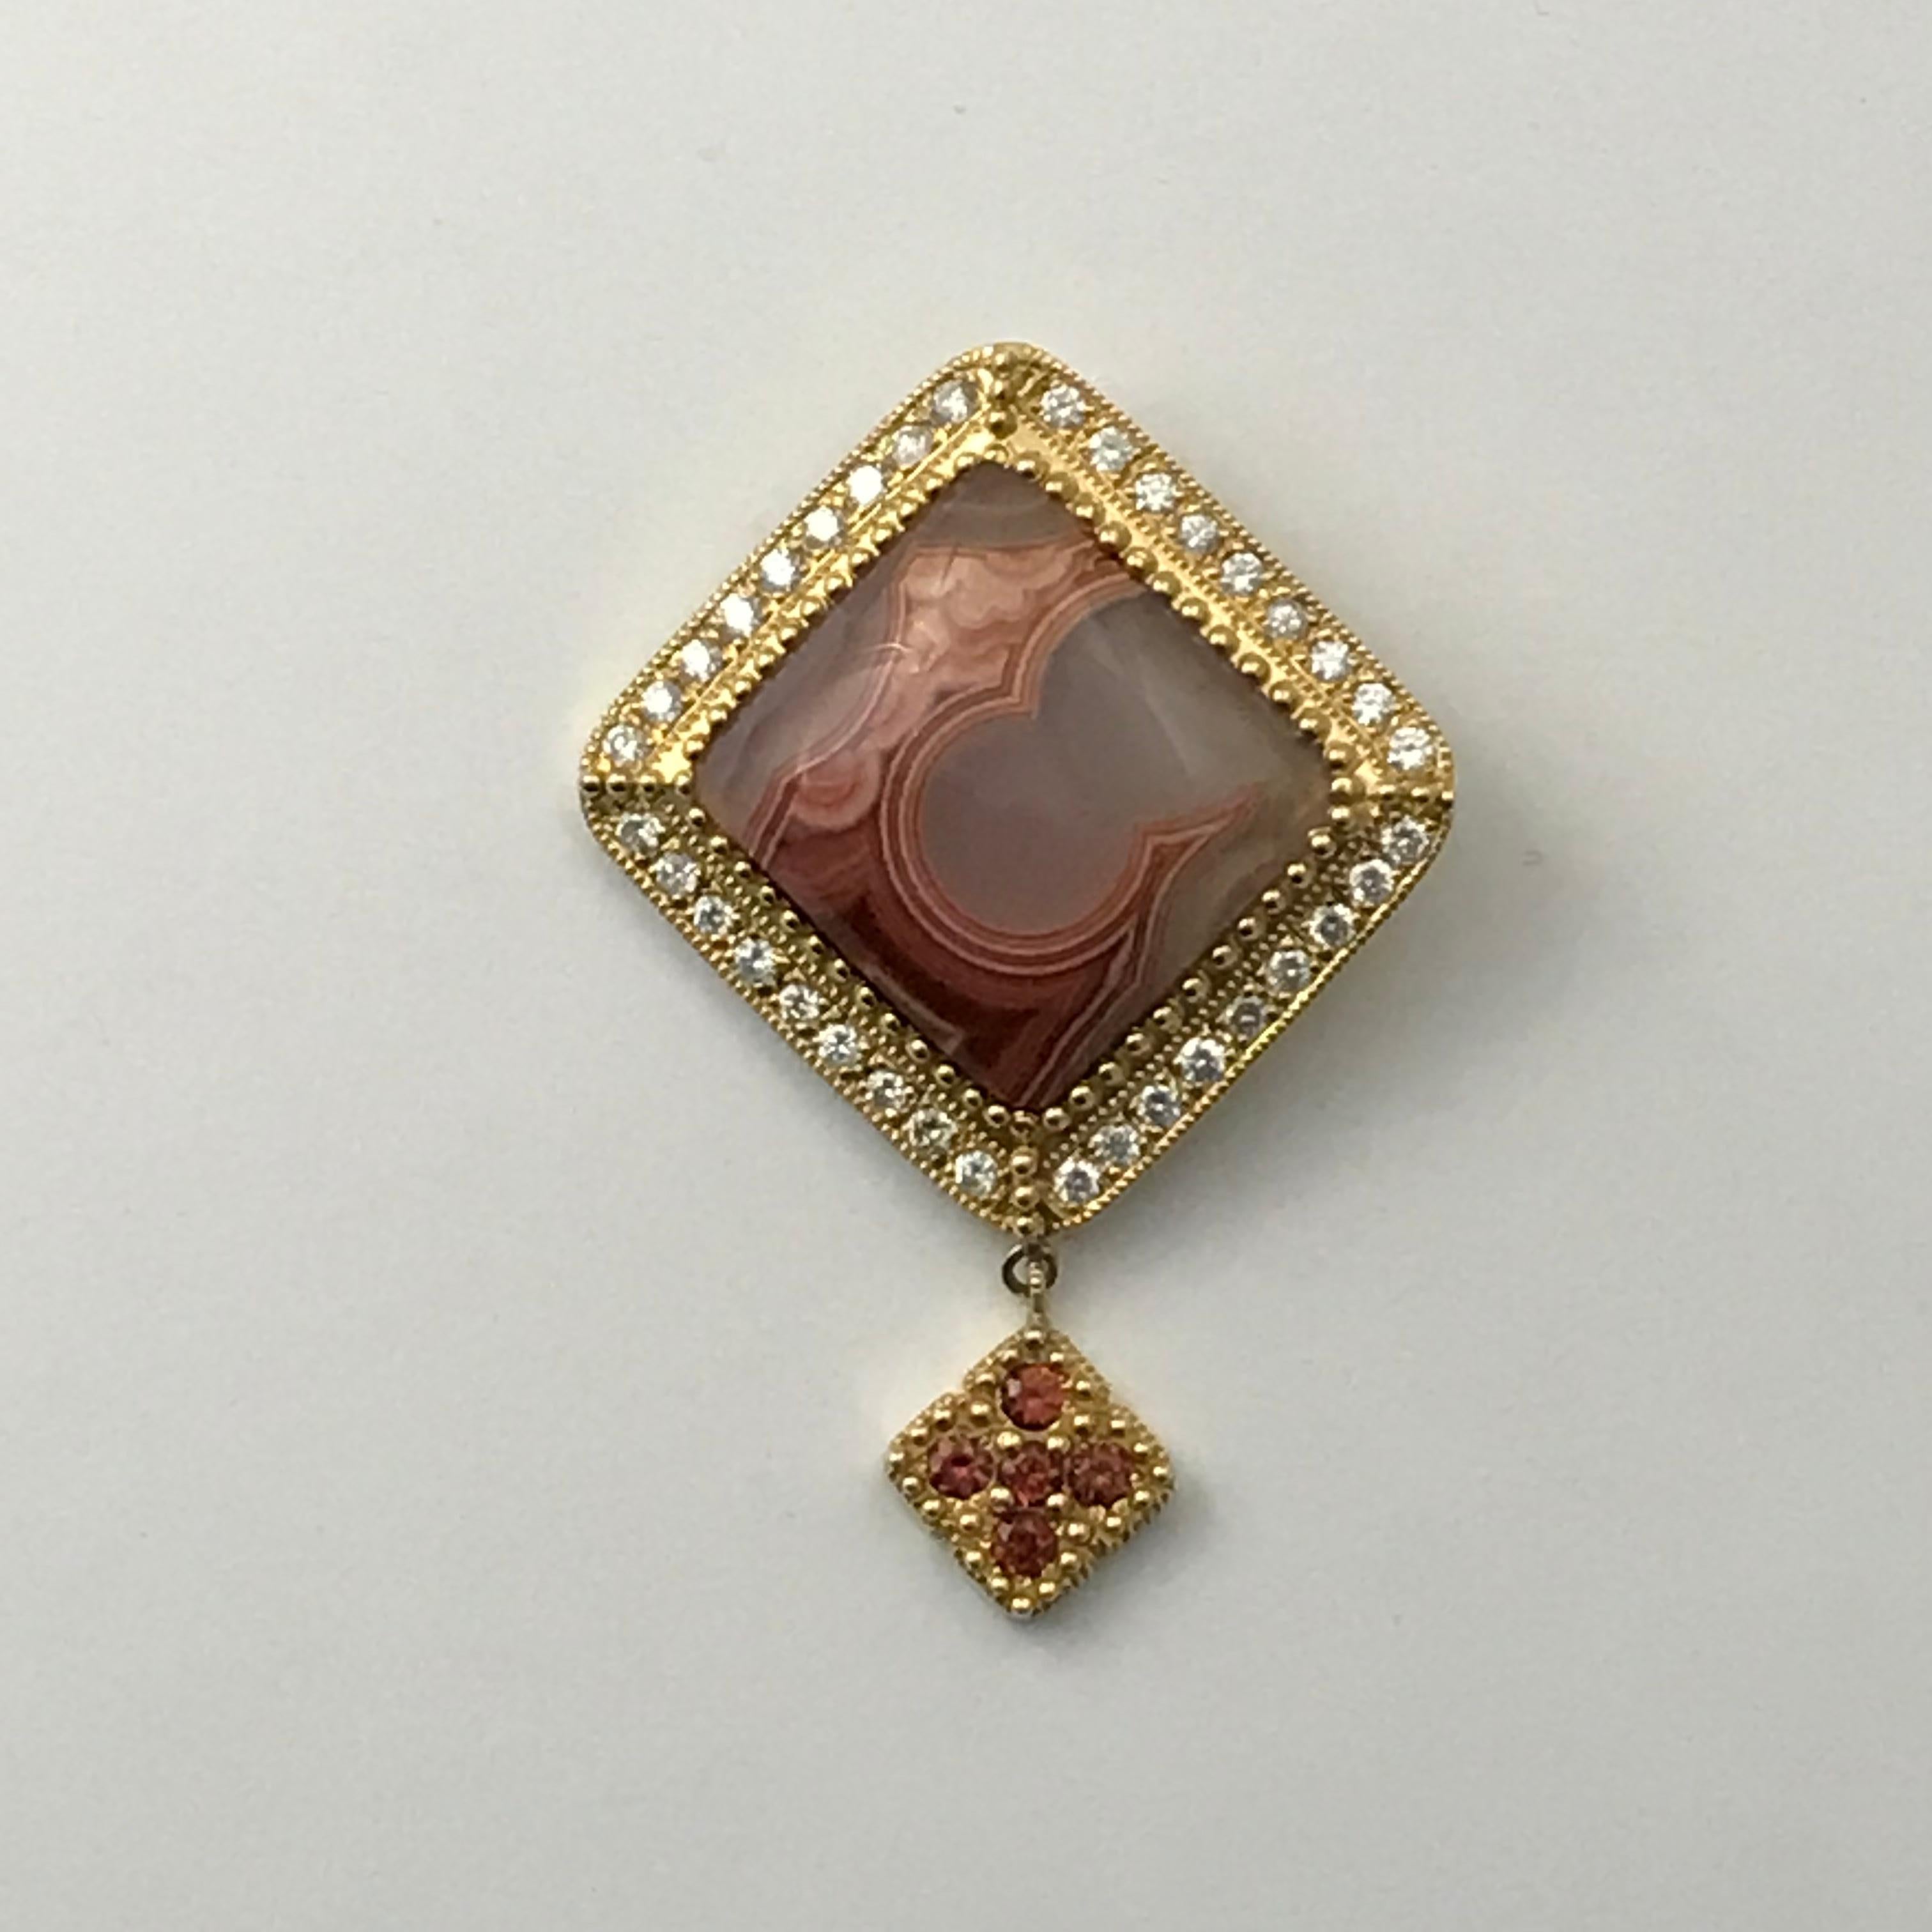 Lacuna Agate Pendant in 14K Gold & Diamonds
agate laguna pendant set in 14k yellow gold set with diamonds weighing 1.27 cts total and a dangle with spessartite garnets. 

Pendant is 35MM X 49MM